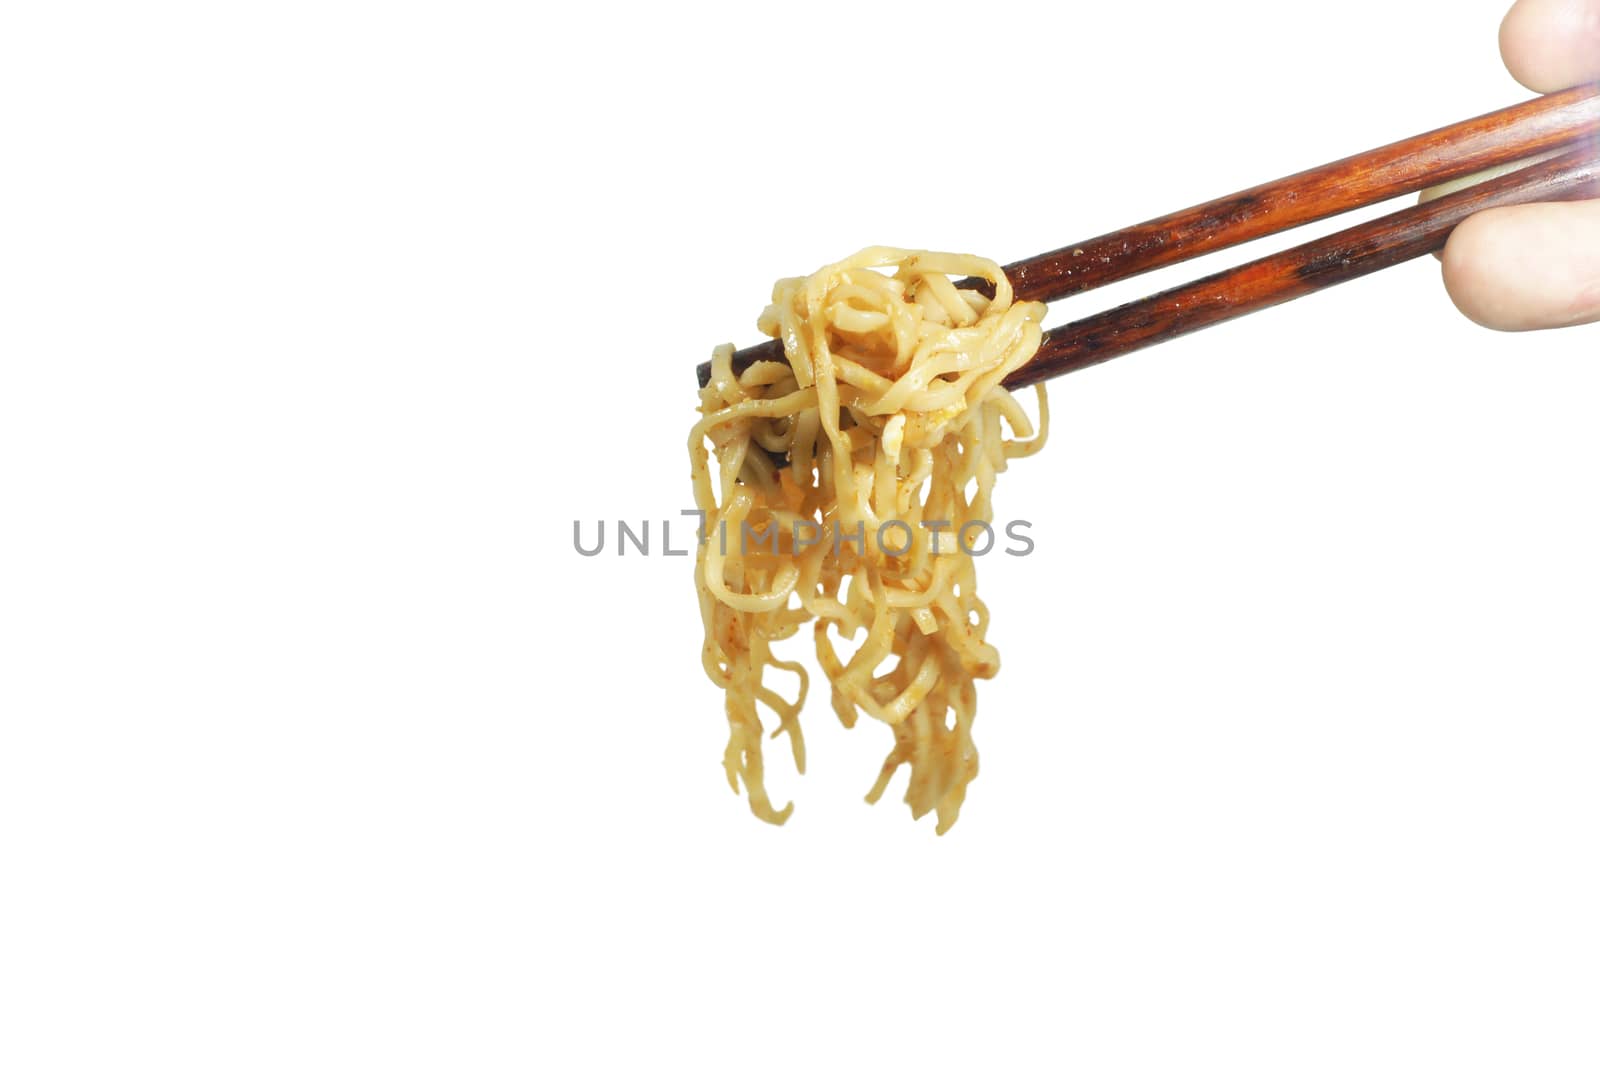 Chopsticks with spicy noodles on white background by mranucha